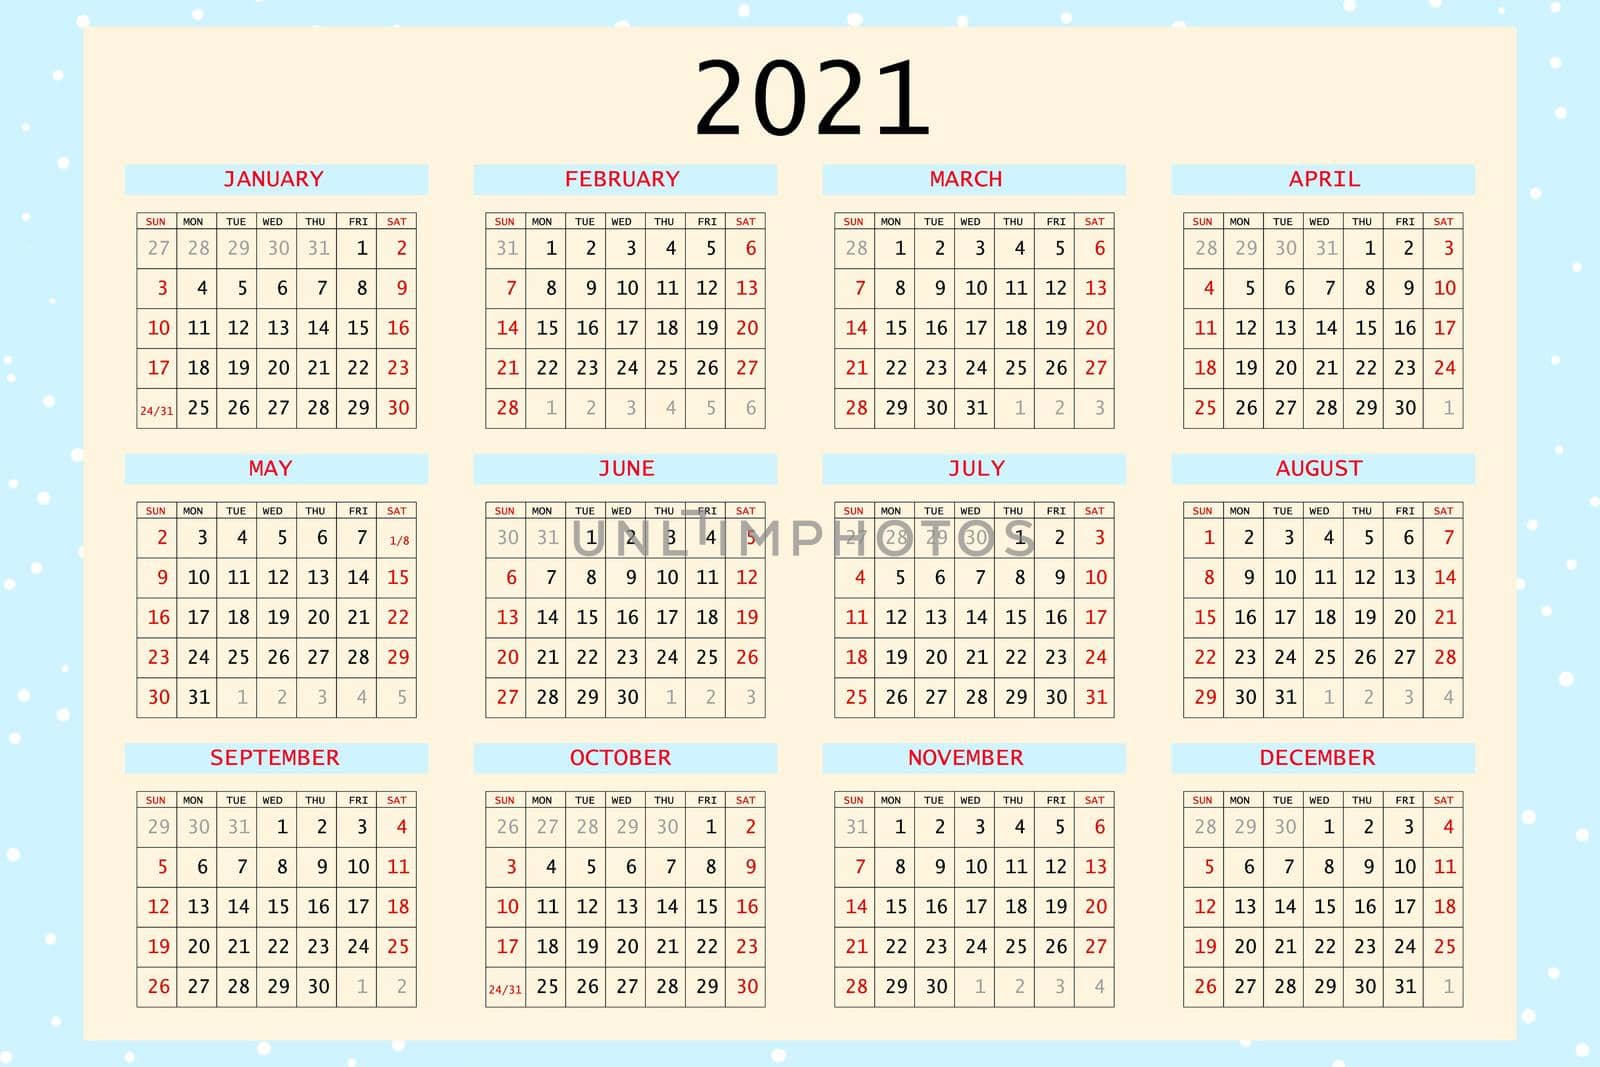 2021 calendar planner. Corporate week. Template layout, 12 months yearly, white background. Simple design for business brochure, flyer, print media, advertisement. Week starts from Sunday. A4 size